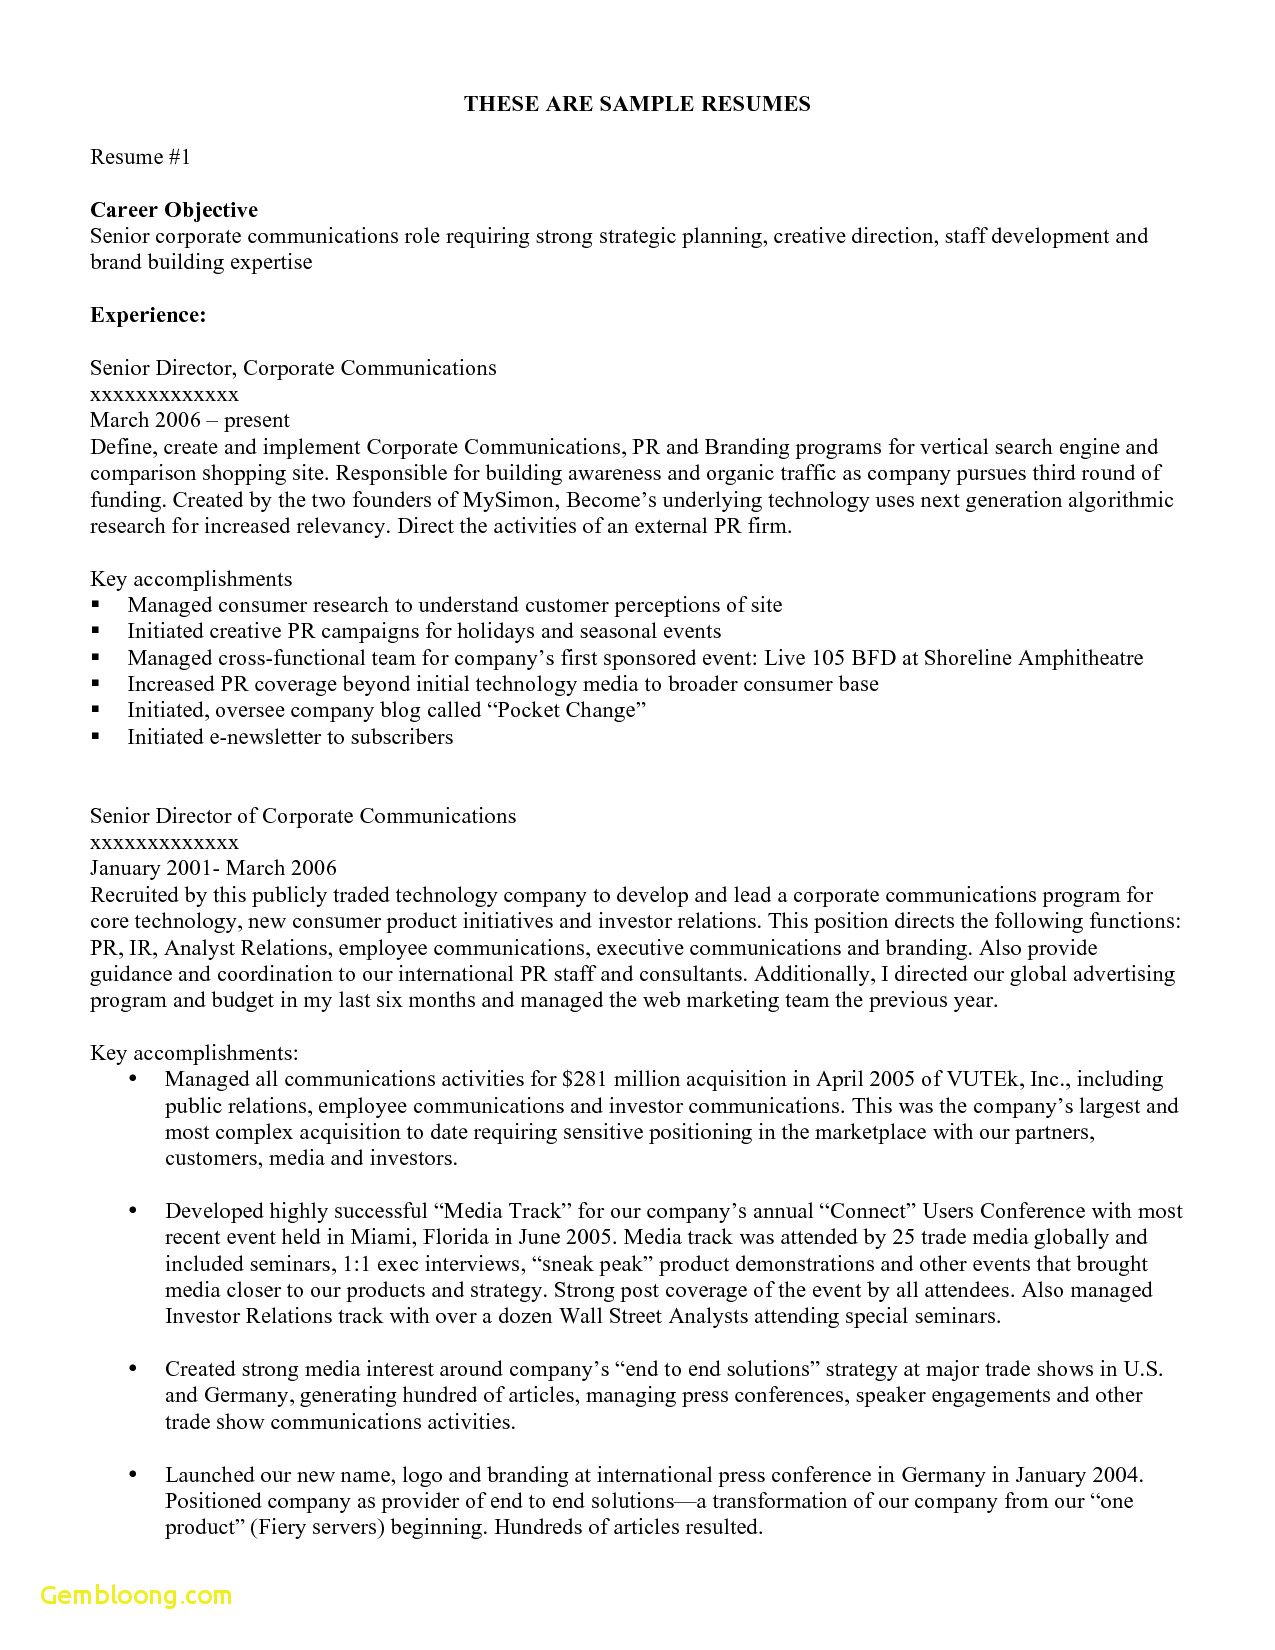 Letter to Investors Template - 23 Insurance Resume Templates Free Sample Resume